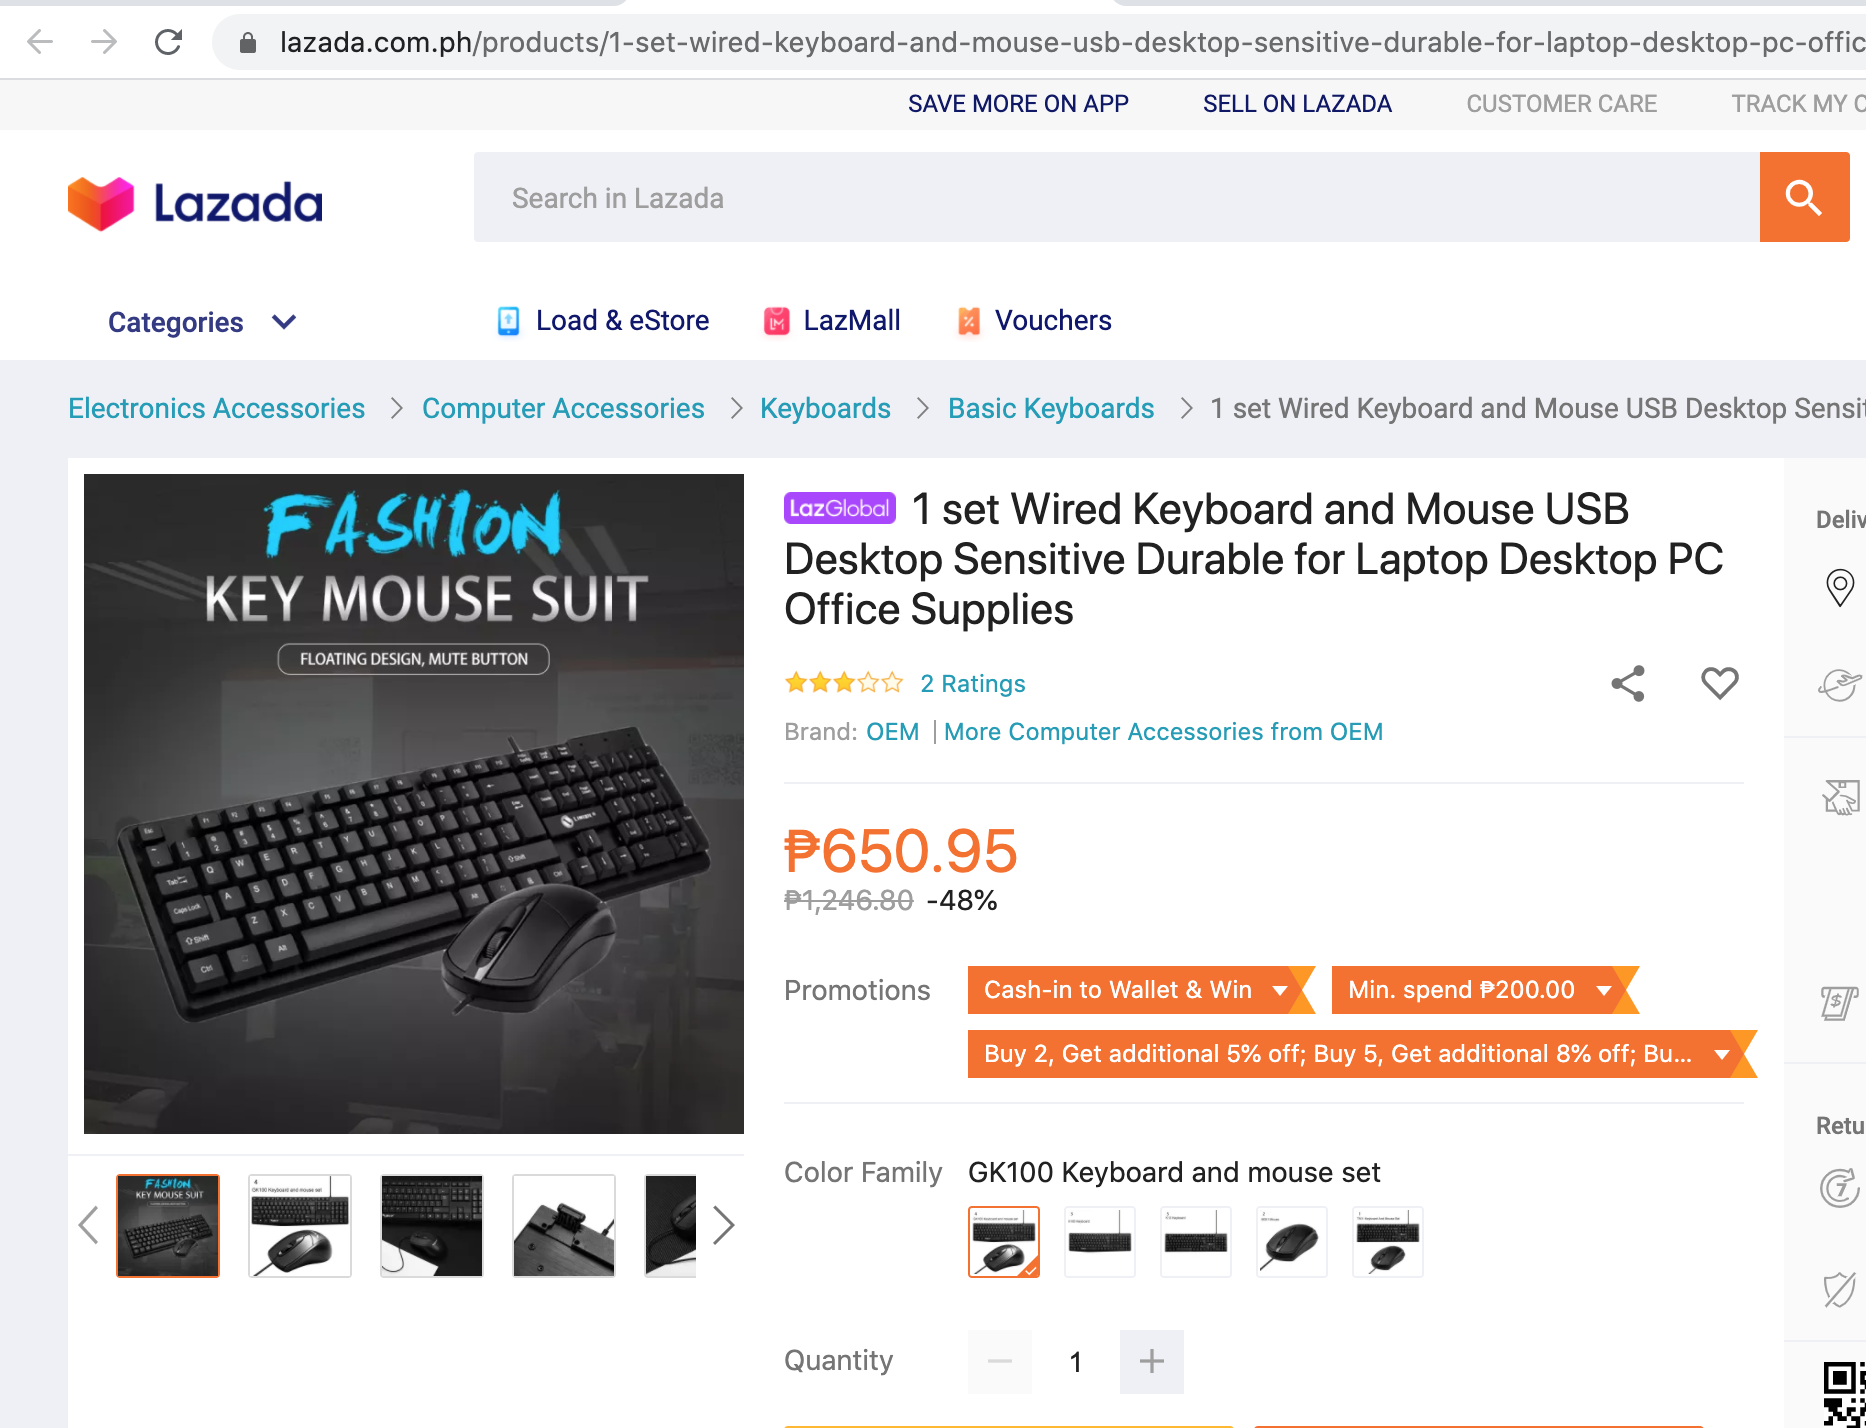 Keyboard and mouse with a different price